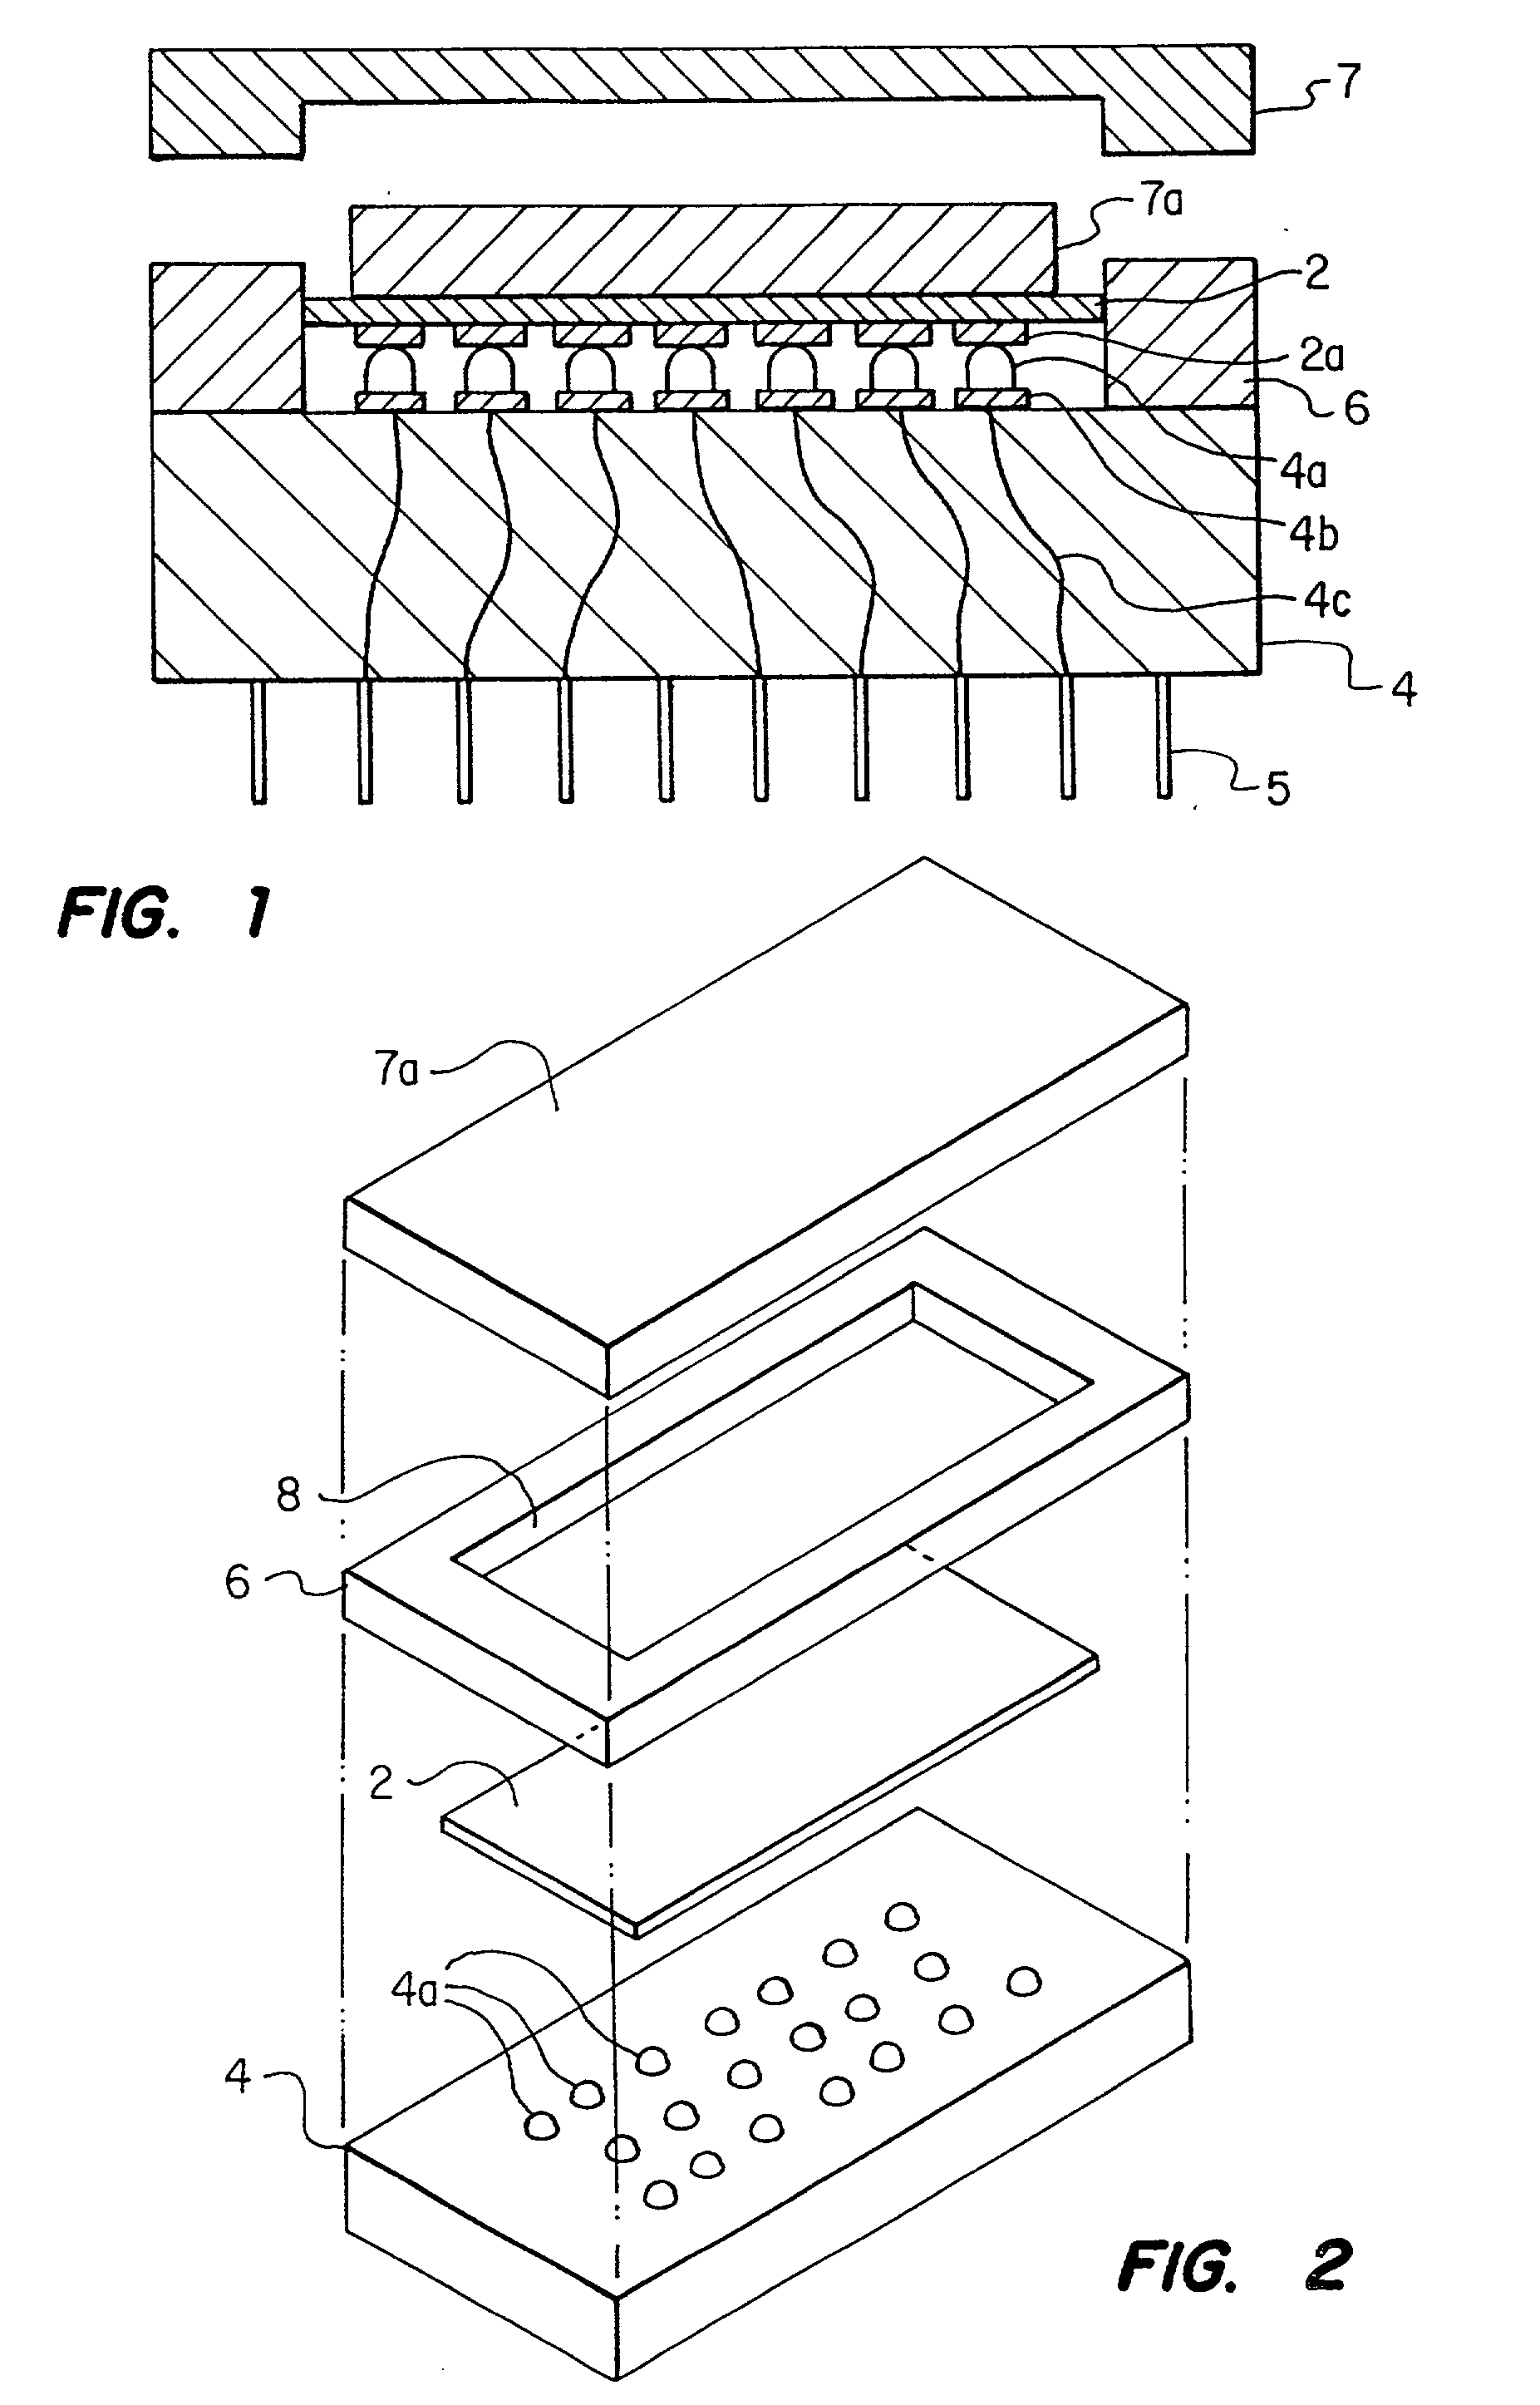 Method for forming conductive bumps for the purpose of contrructing a fine pitch test device